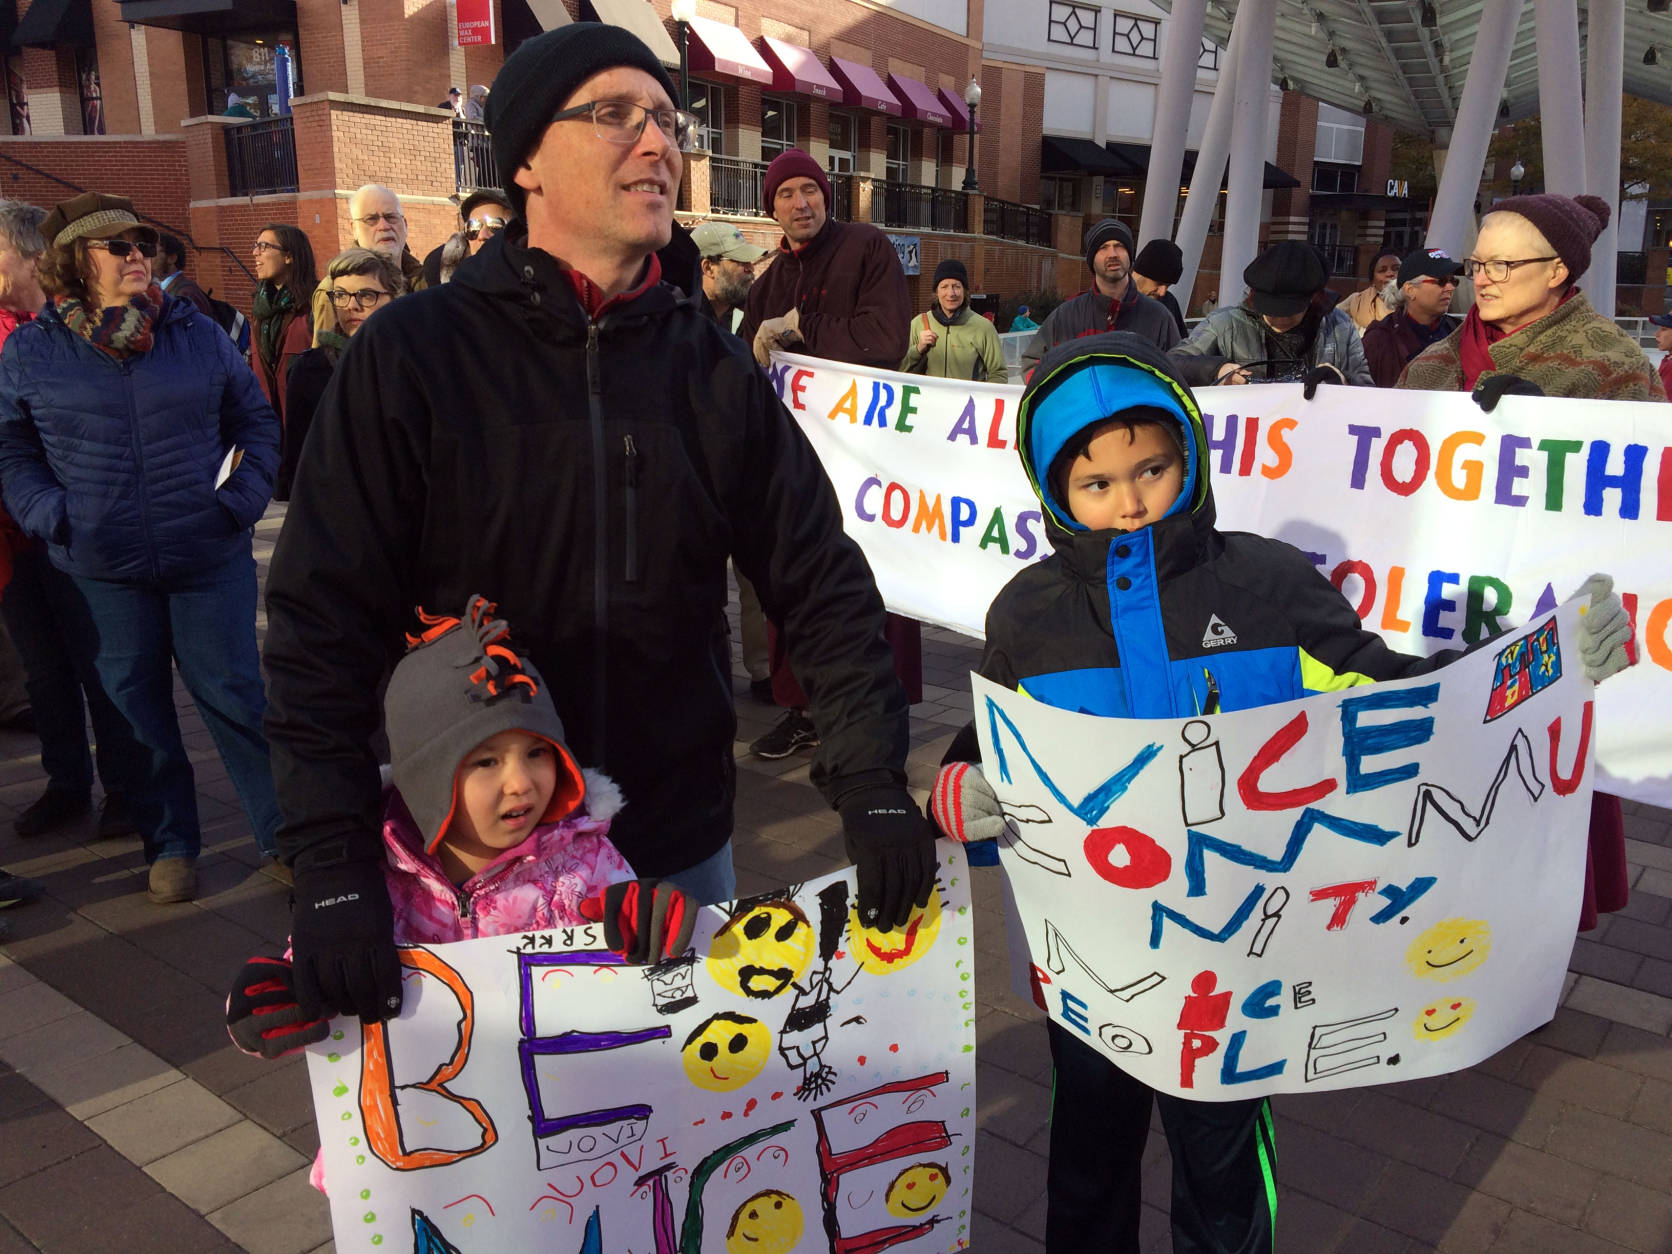 Korey Hartwich and children, Sanae, 5, and Rowan, 8, participate in an interfaith rally in Silver Spring, Md. on Sunday,  Nov. 20, 2016. (WTOP/Dick Uliano)